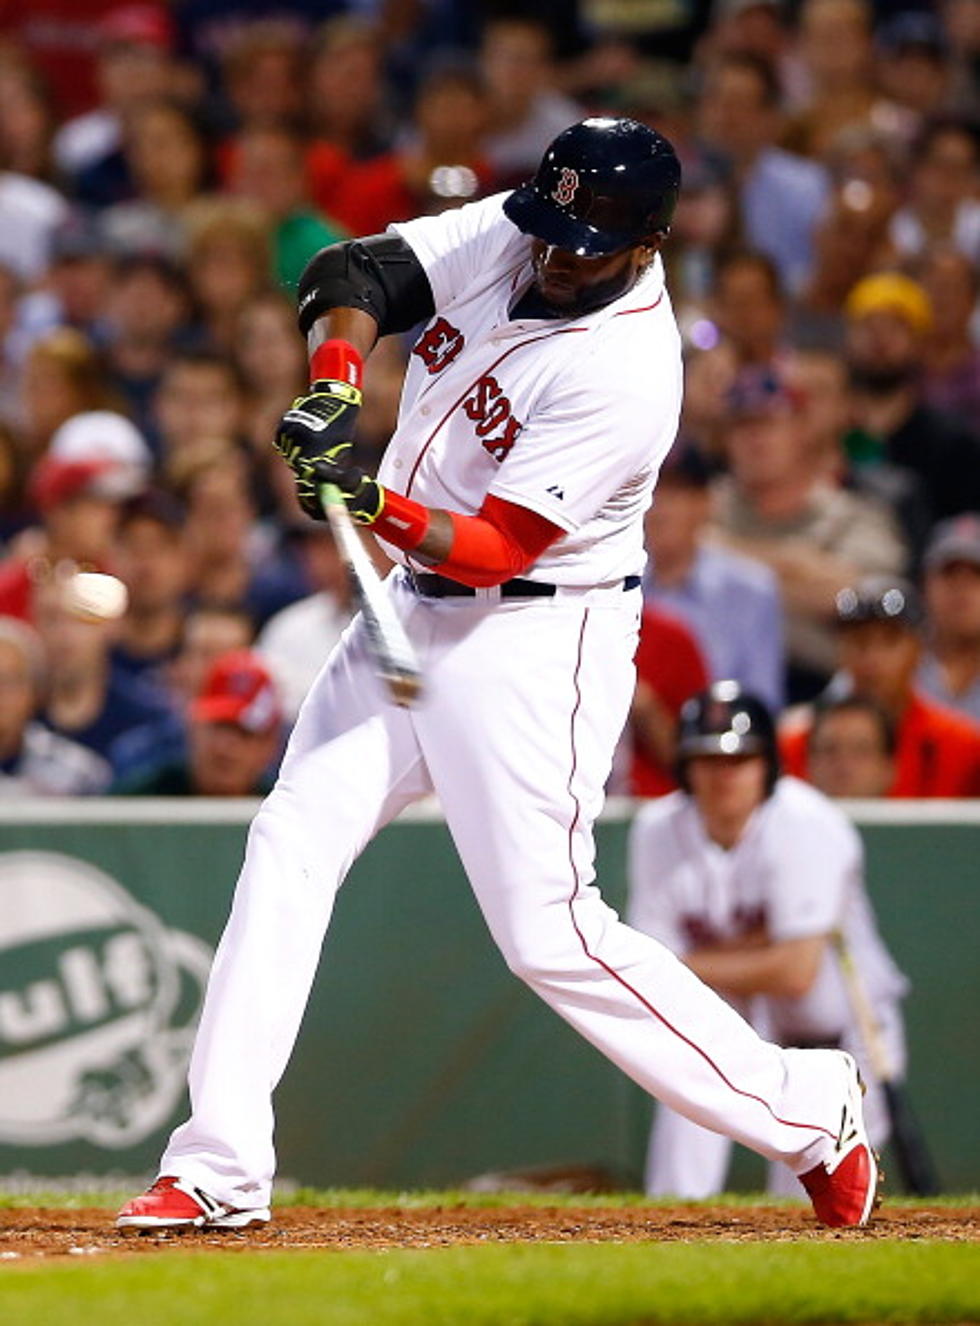 Ortiz Hits #400 and #401 [Video]